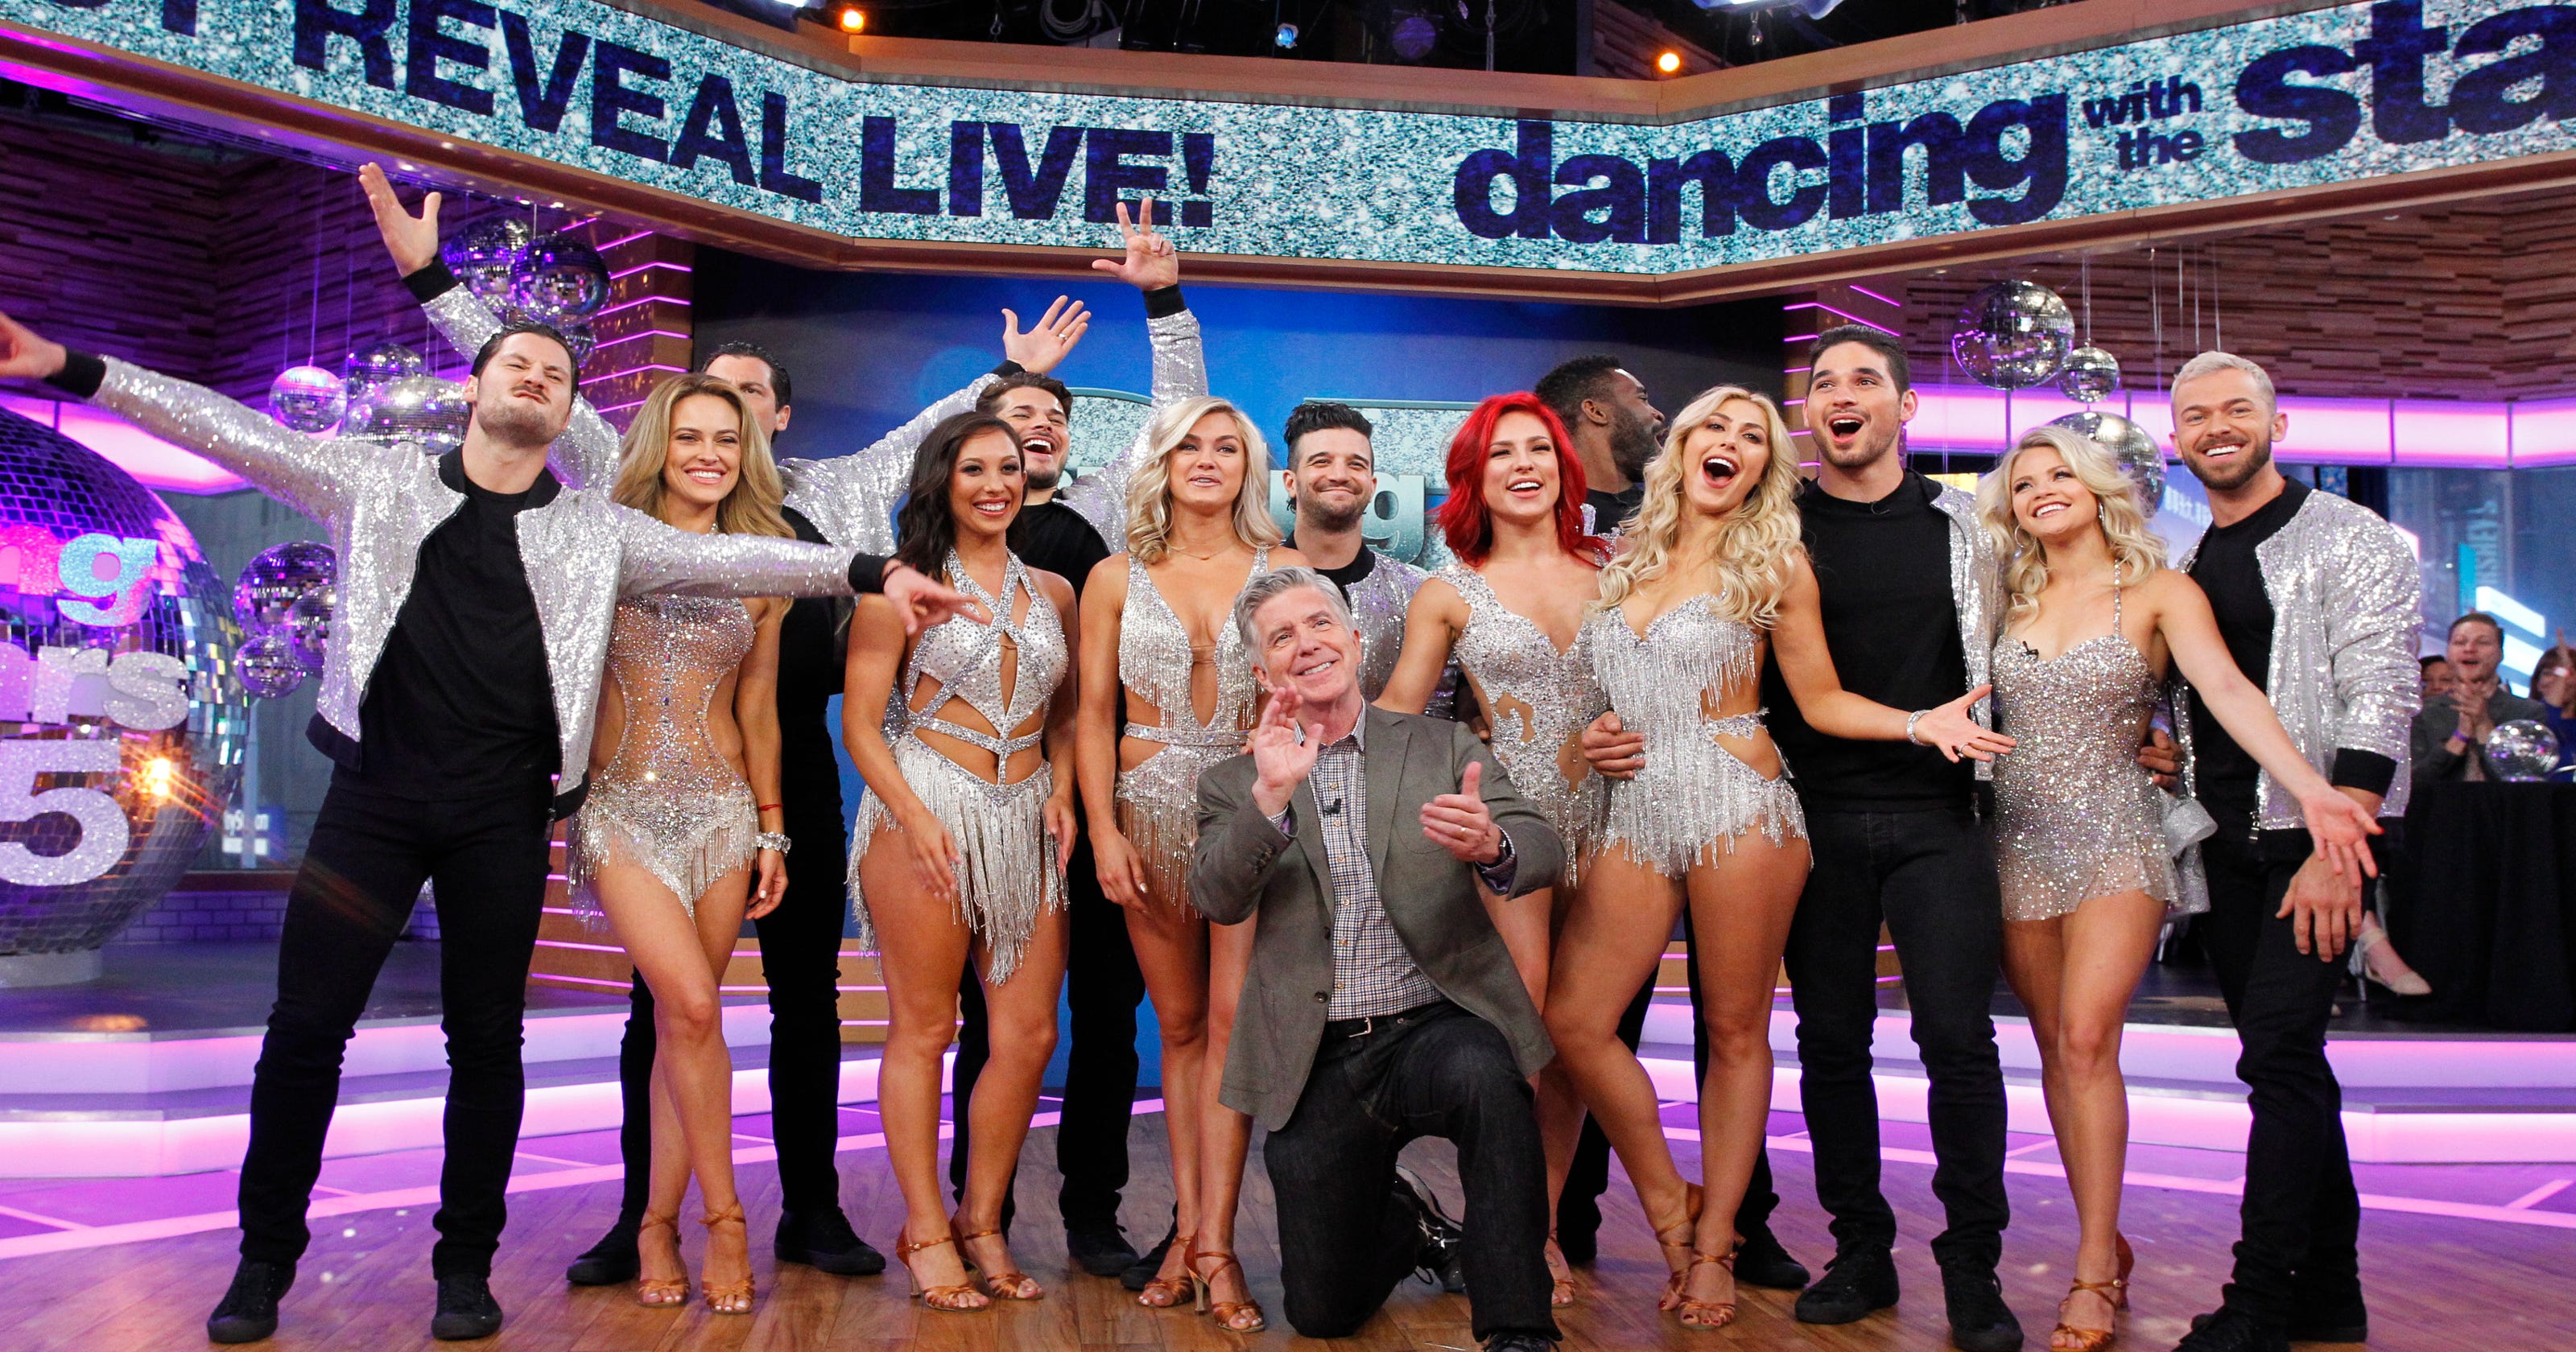 5 of our favorite ‘Dancing with the Stars’ dances of all time